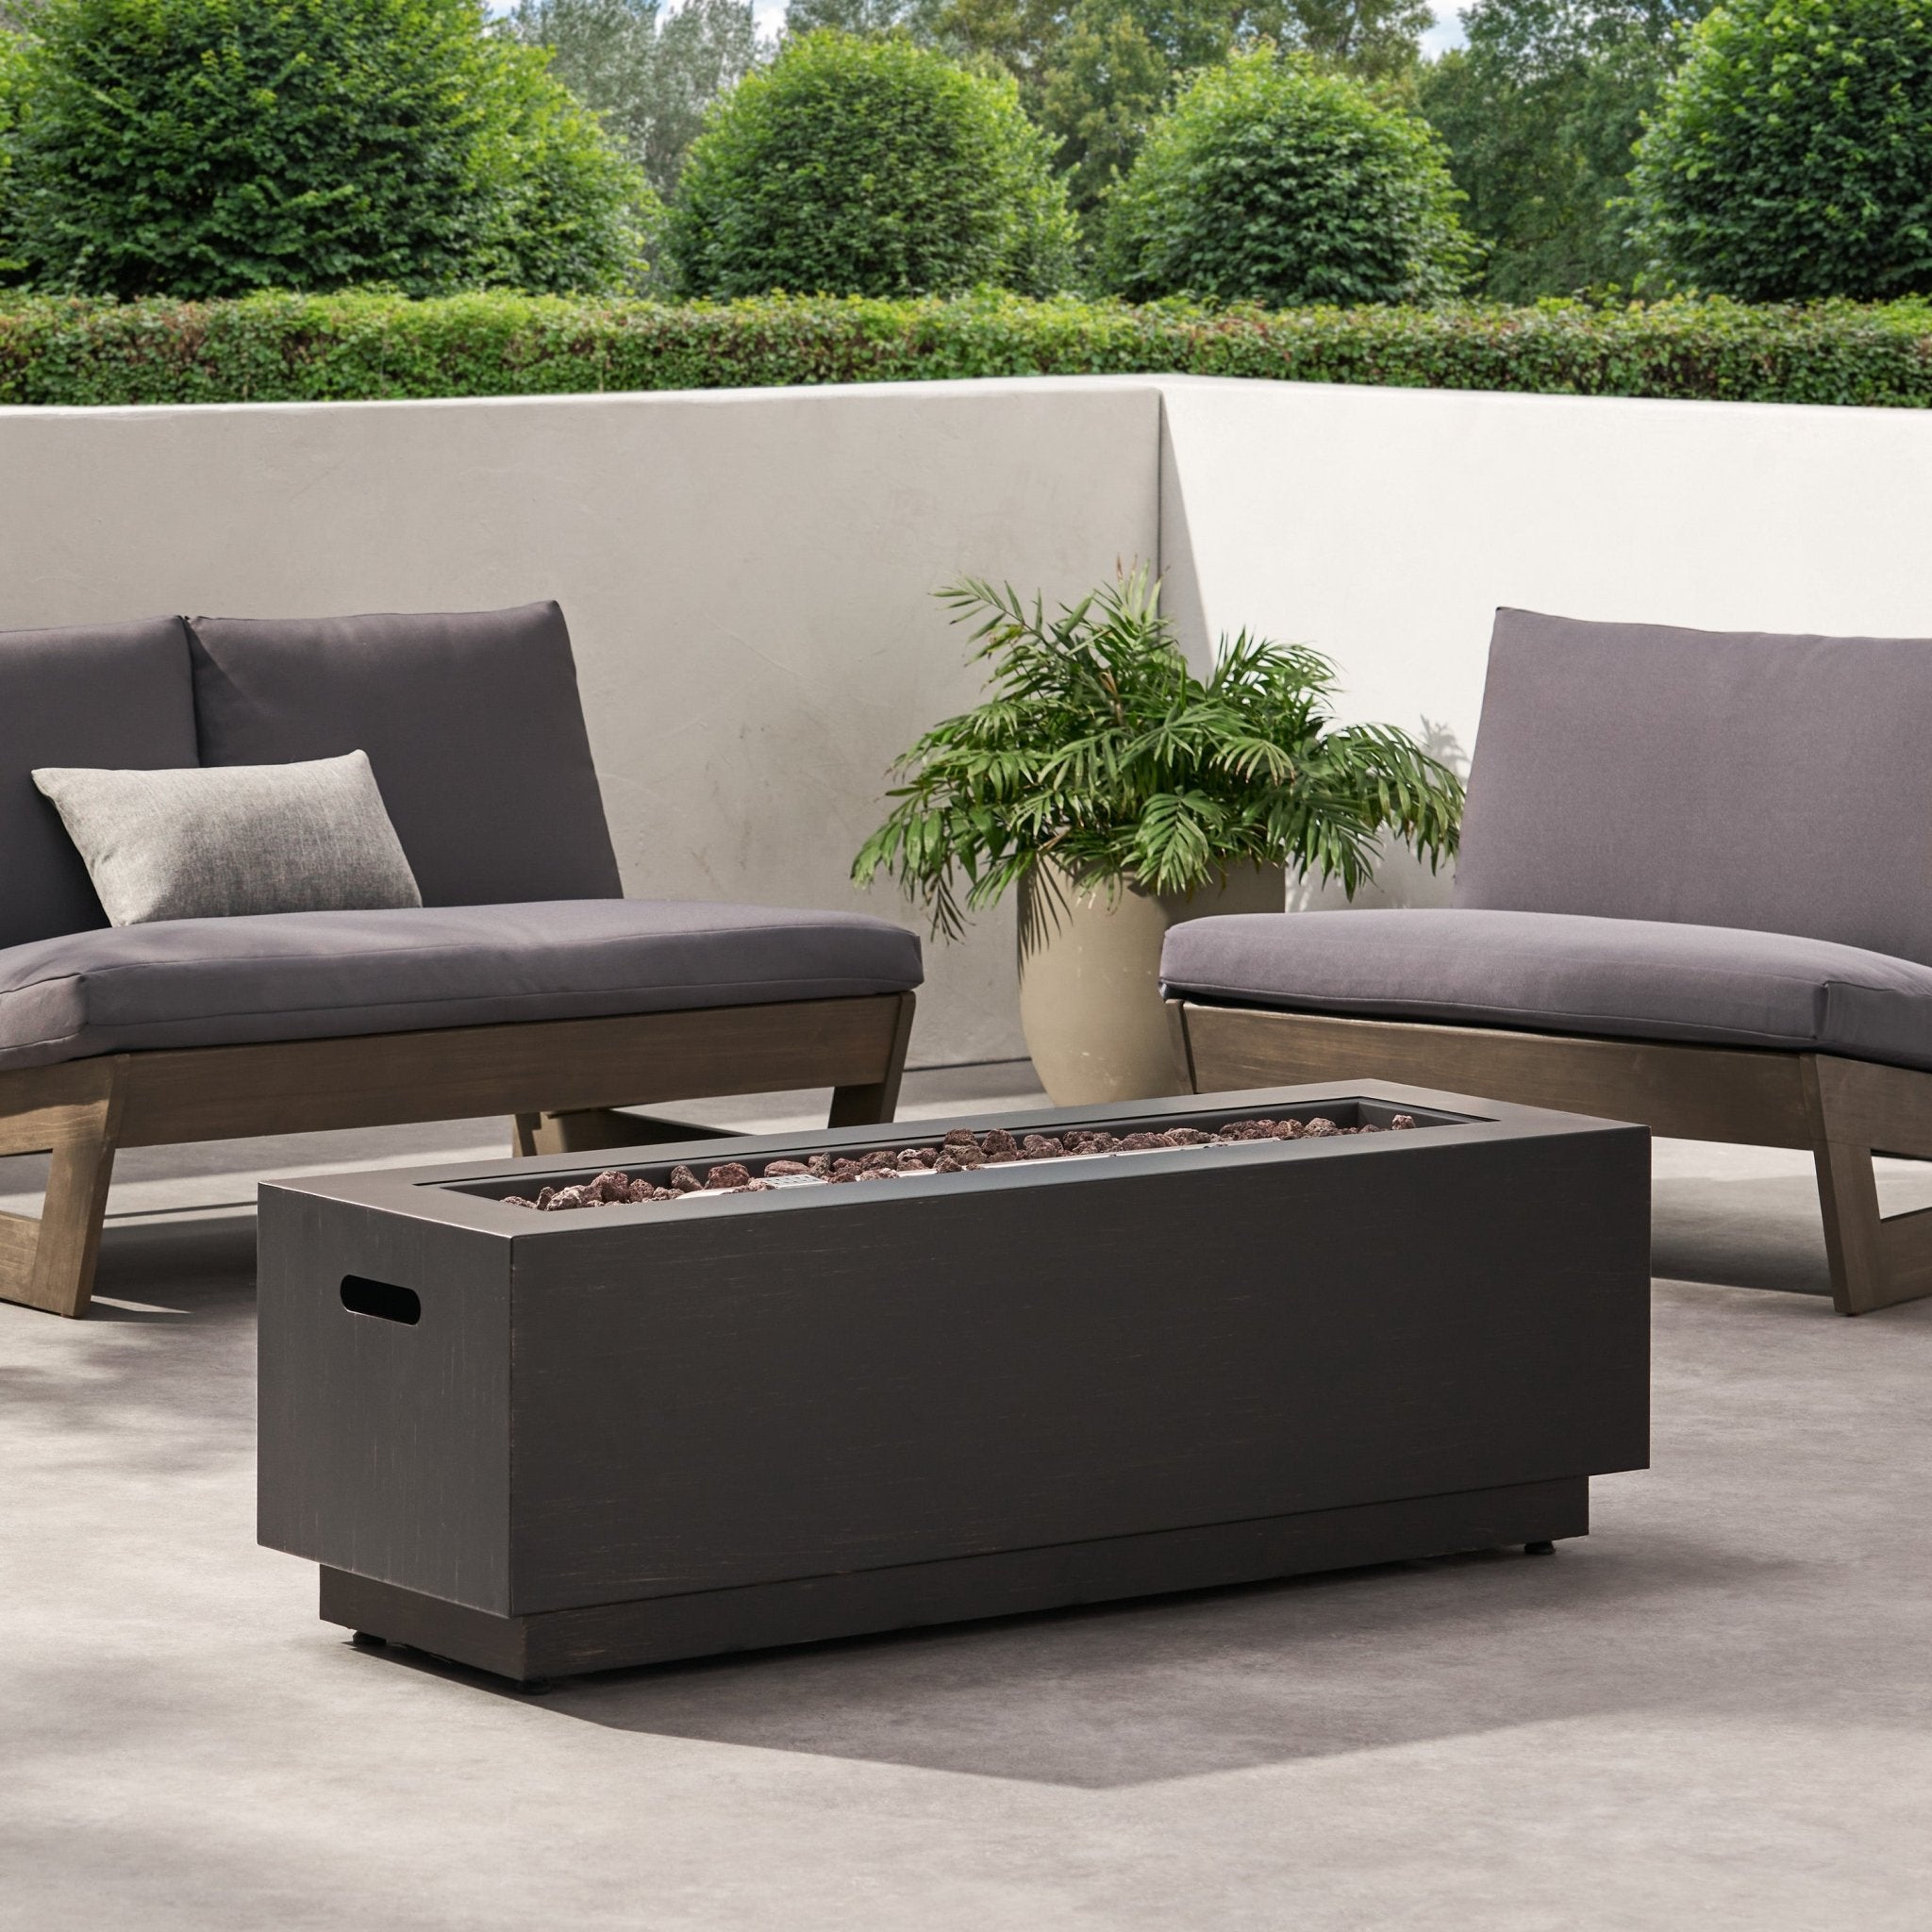 Outdoor Rectangular Fire Pit with Tank Holder - Outdoor